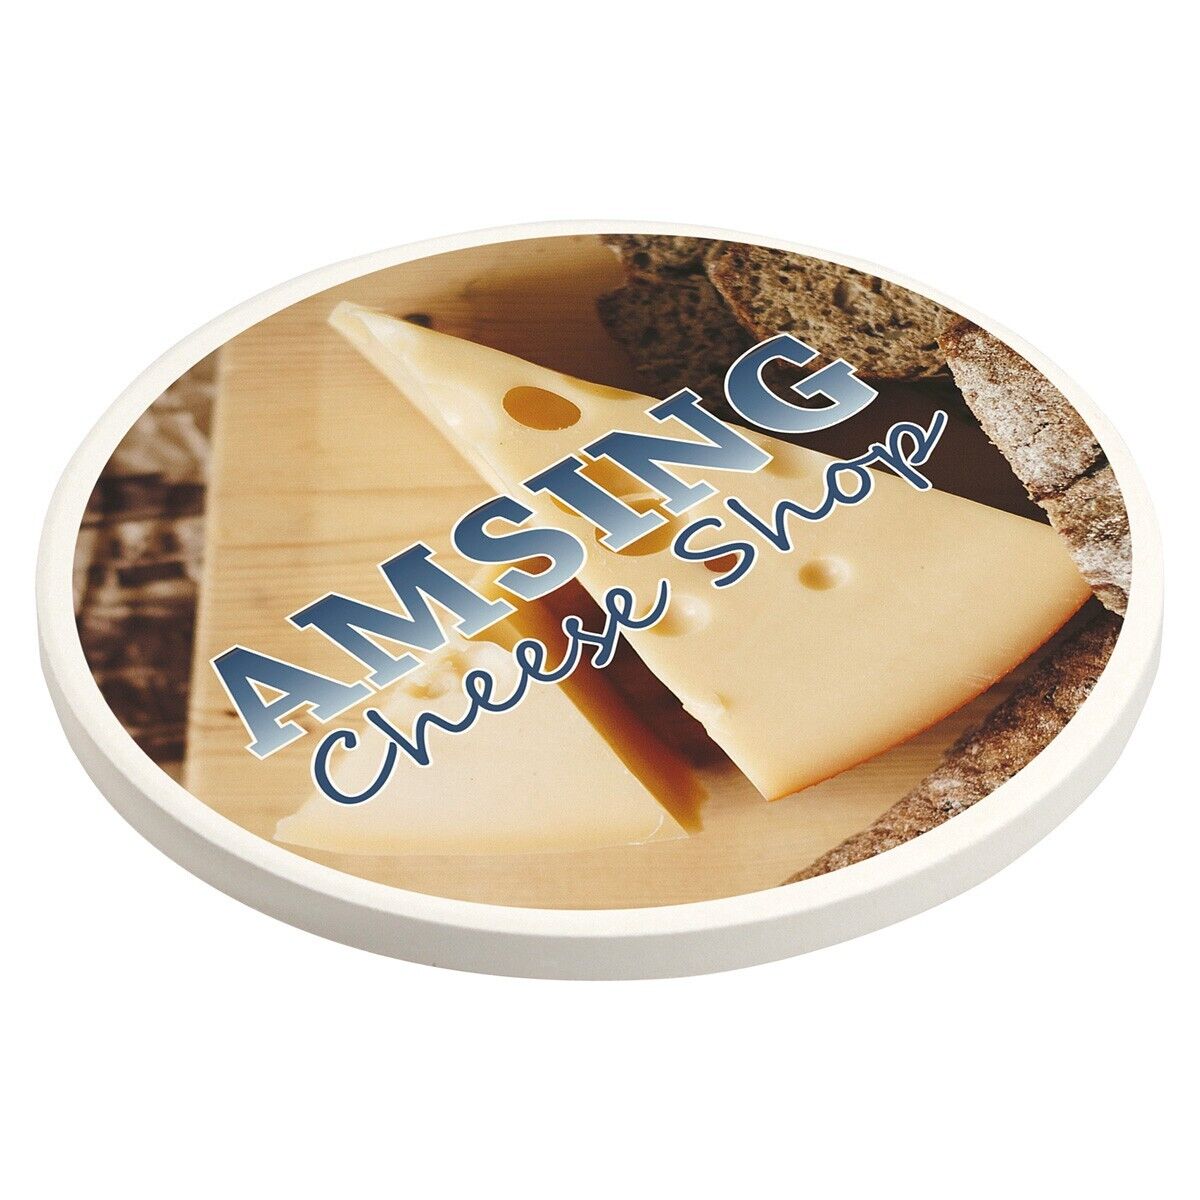 Personalized Cobblestone Absorbent Coaster with Cork Base Printed in Full Color